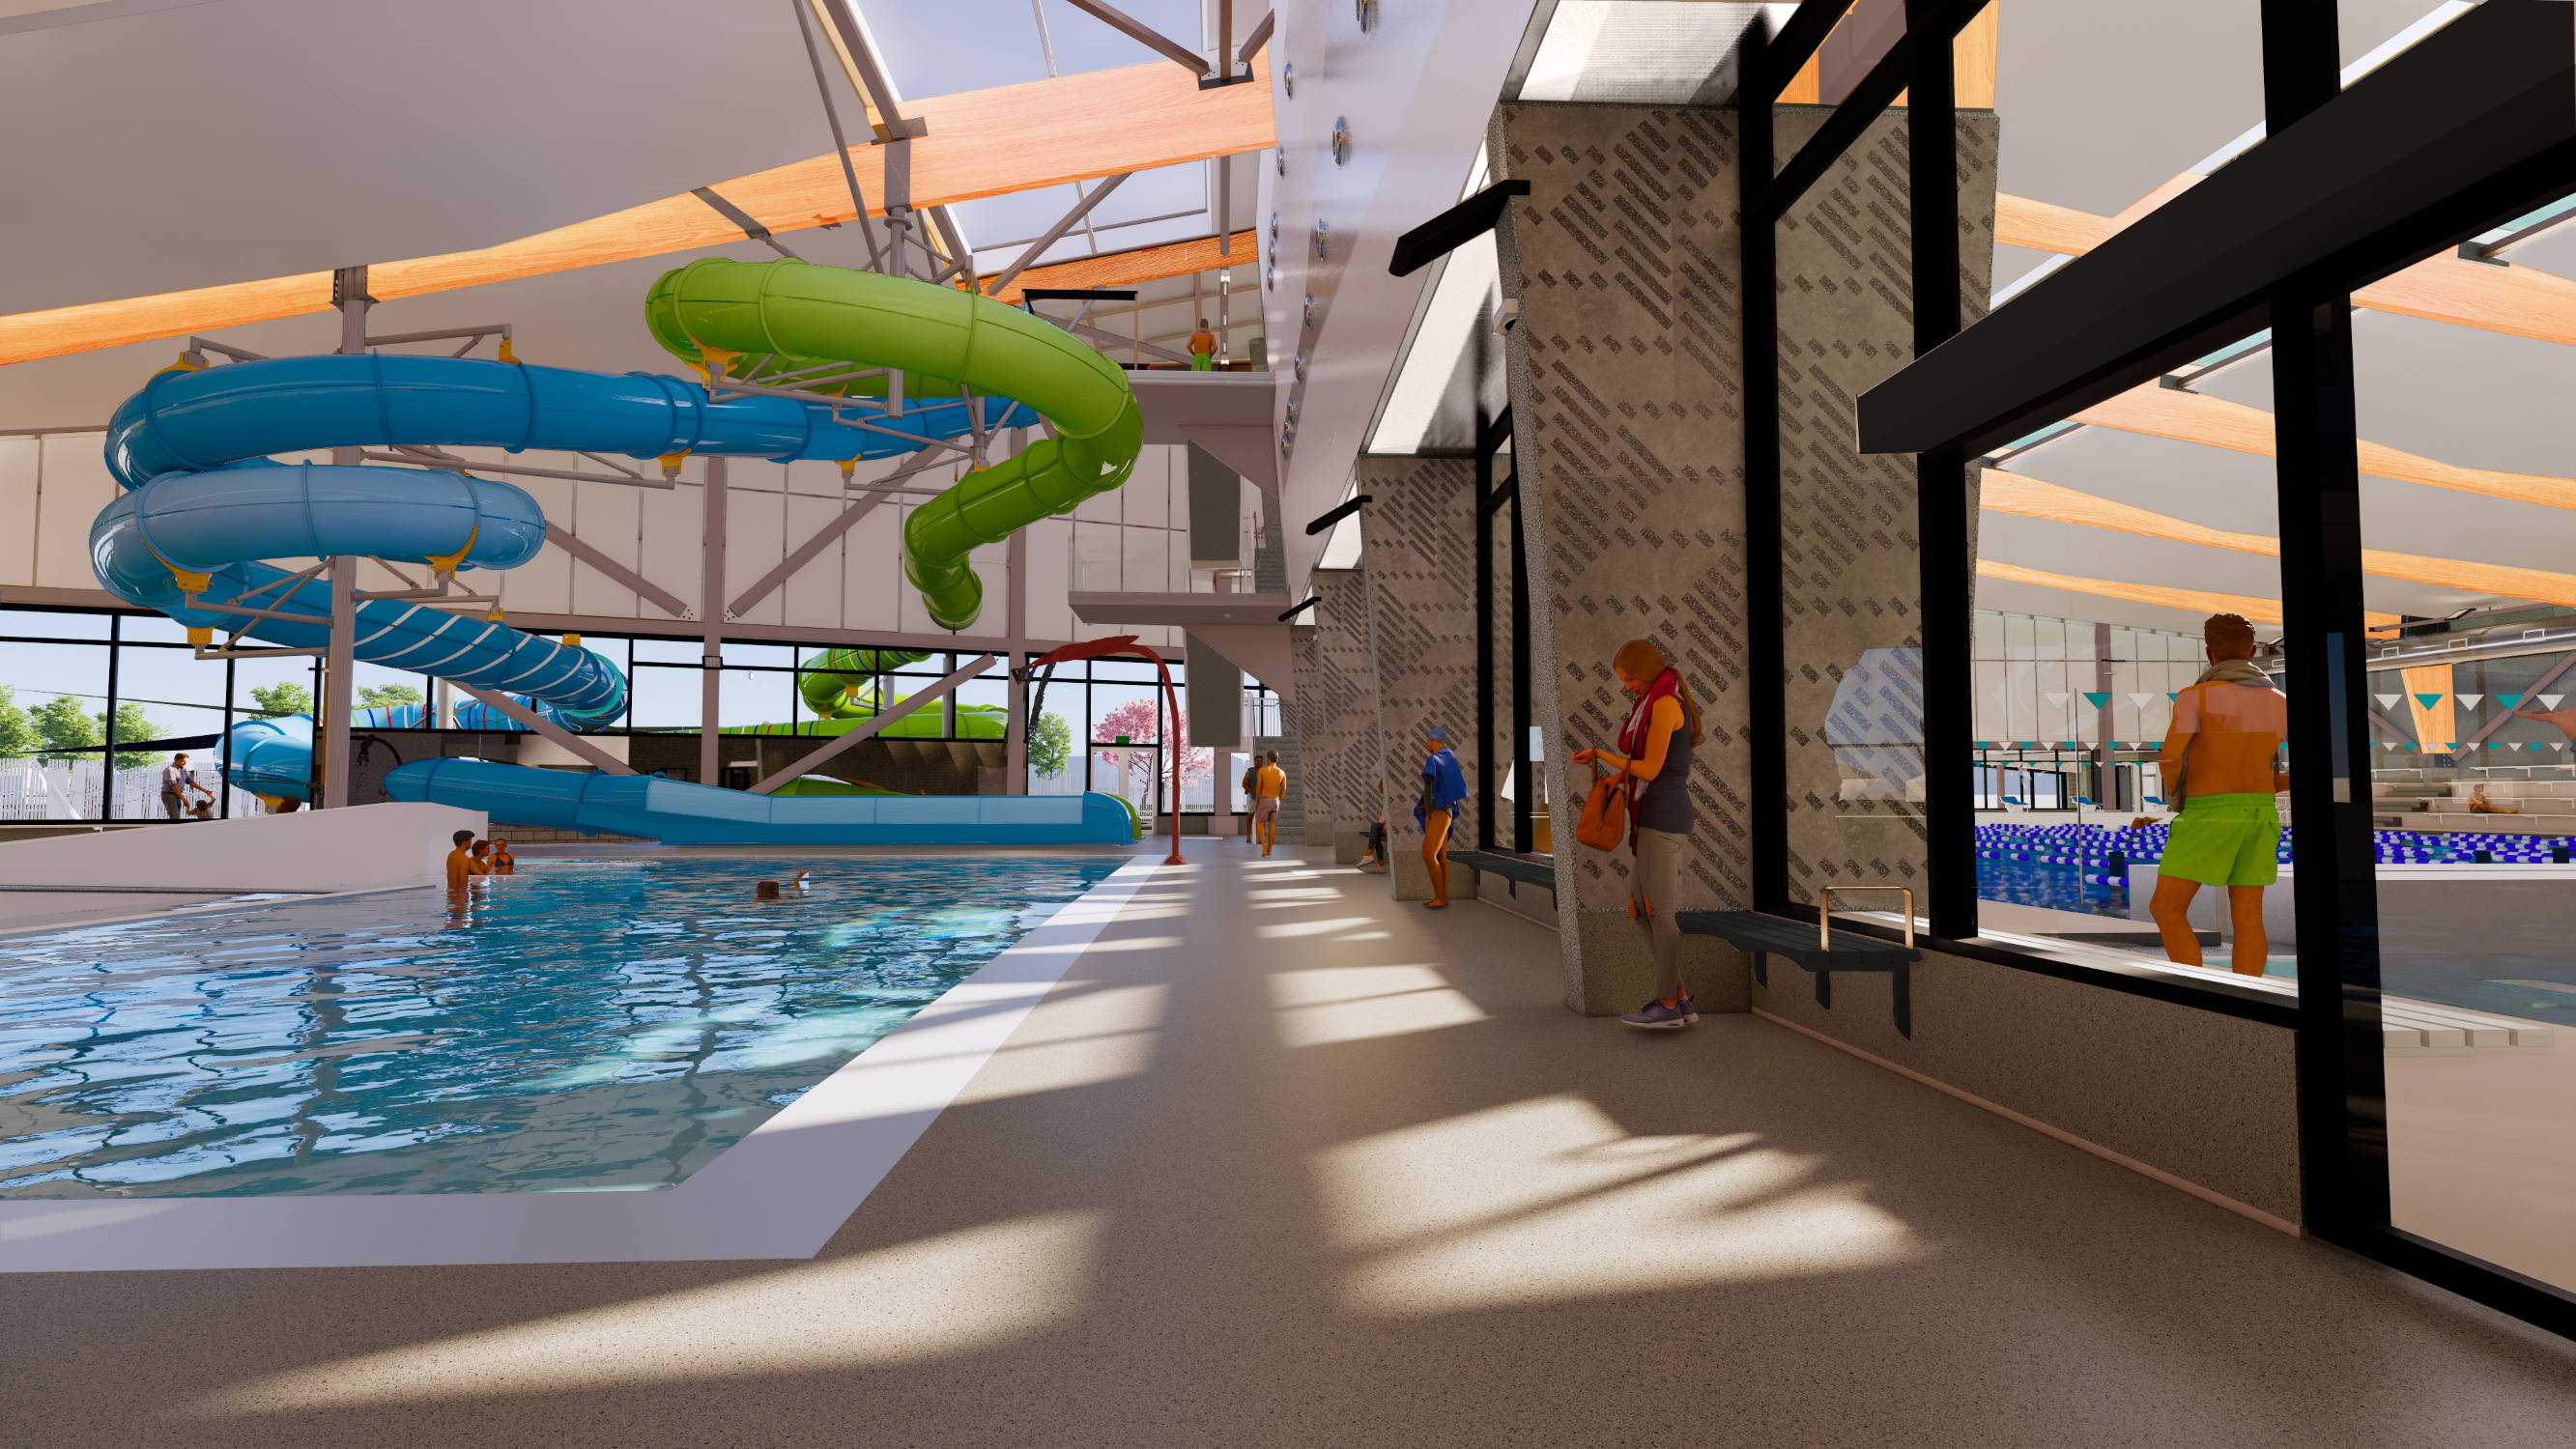 An artistic render of the inside of the leisure pool at Naenae Pool & Fitness Centre showing a hydroslide in the background.